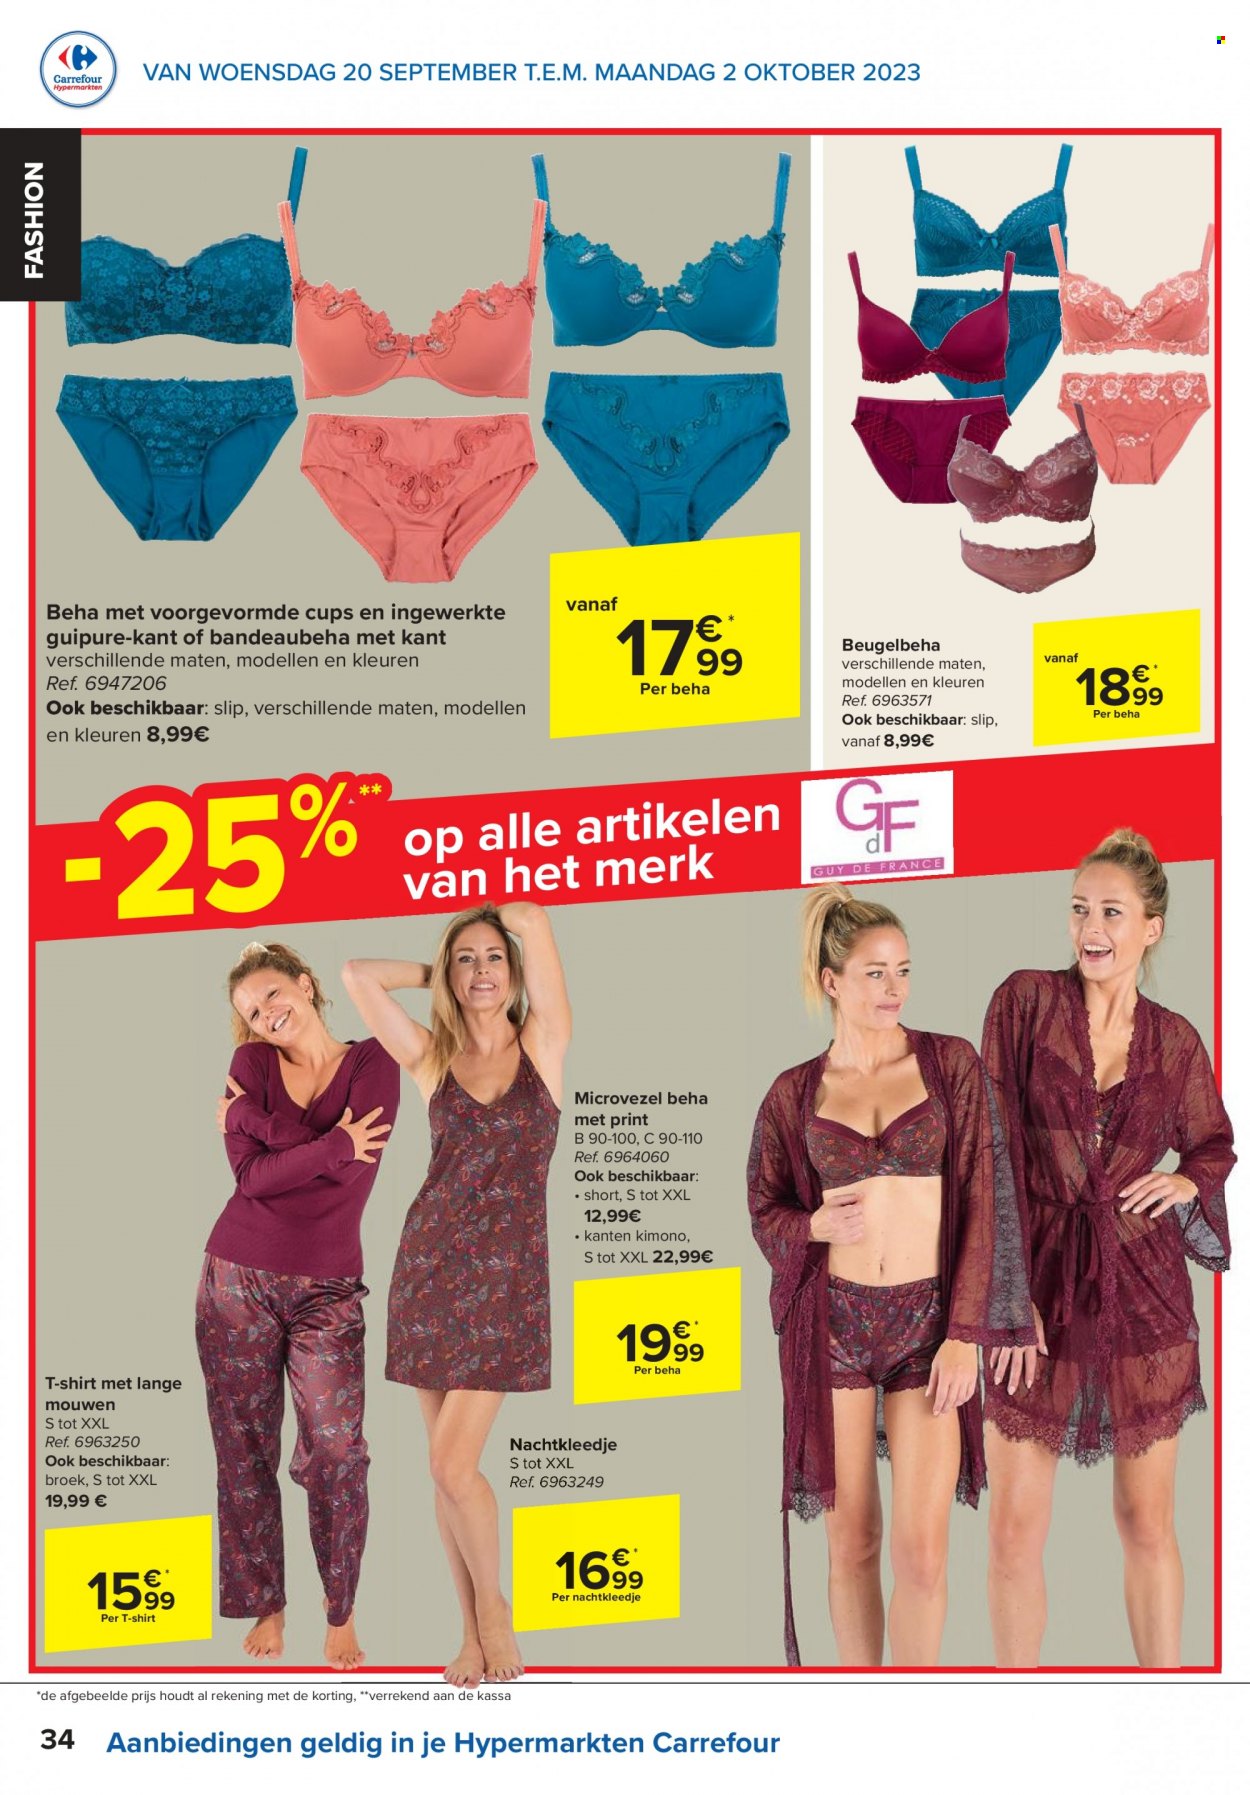 Catalogue Carrefour hypermarkt - 20.9.2023 - 2.10.2023. Page 34.